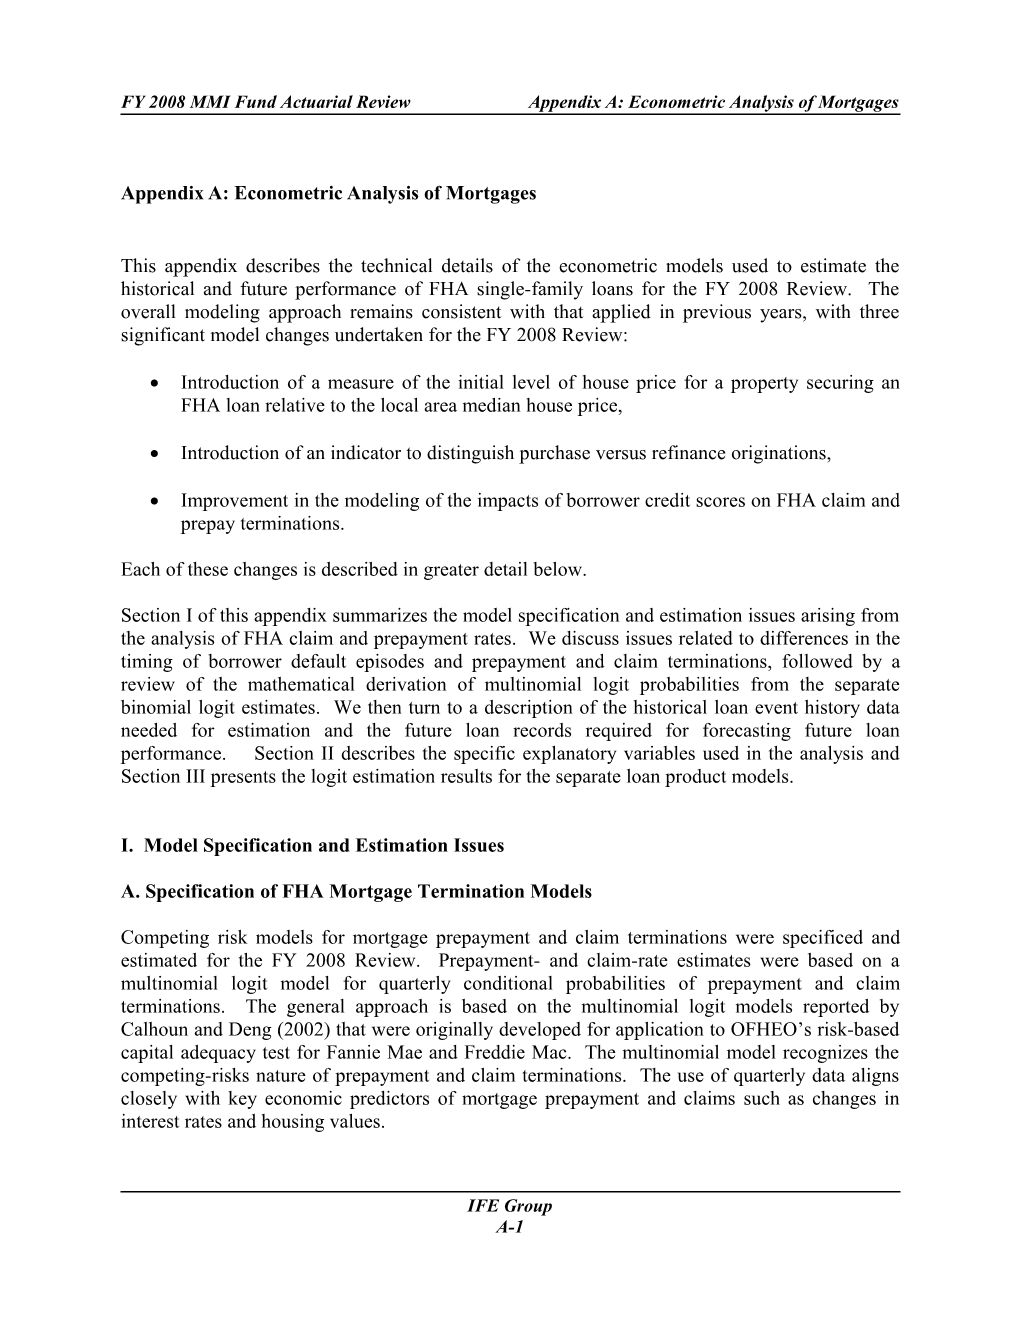 FY 2008 MMI Fund Actuarial Reviewappendix A: Econometric Analysis of Mortgages